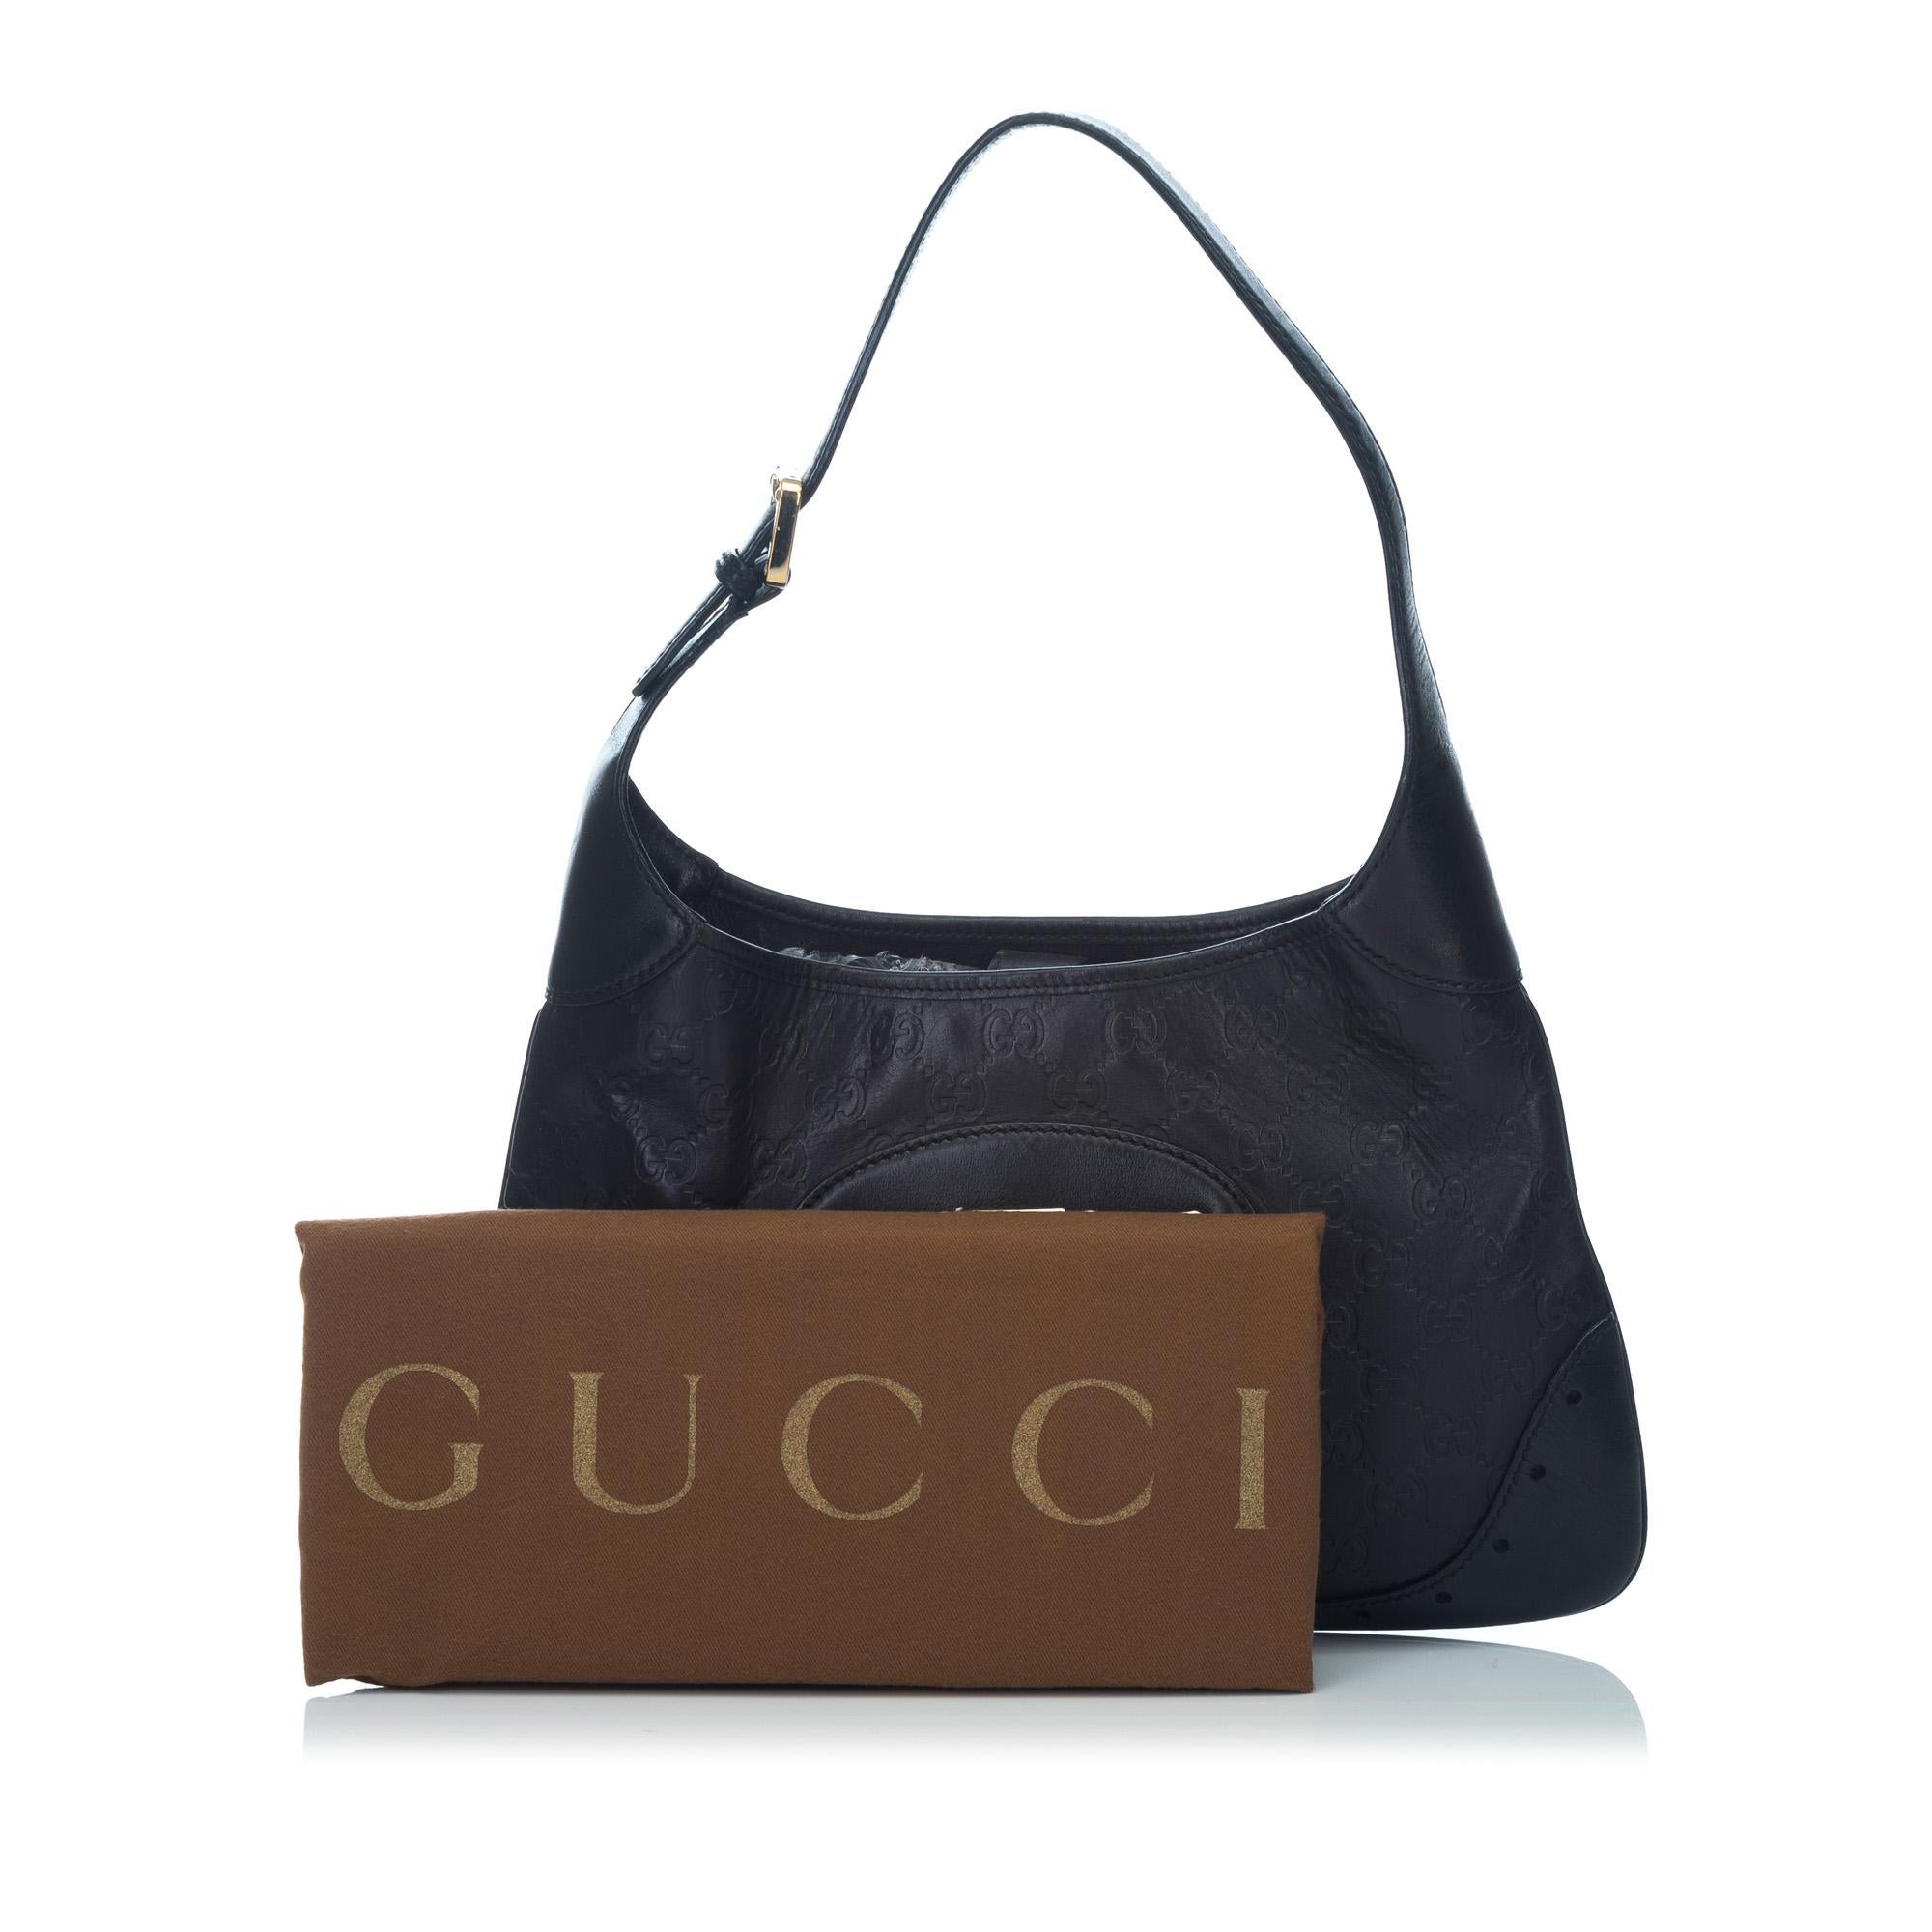 Gucci Black Guccissima Leather Punch Hobo For Sale 5